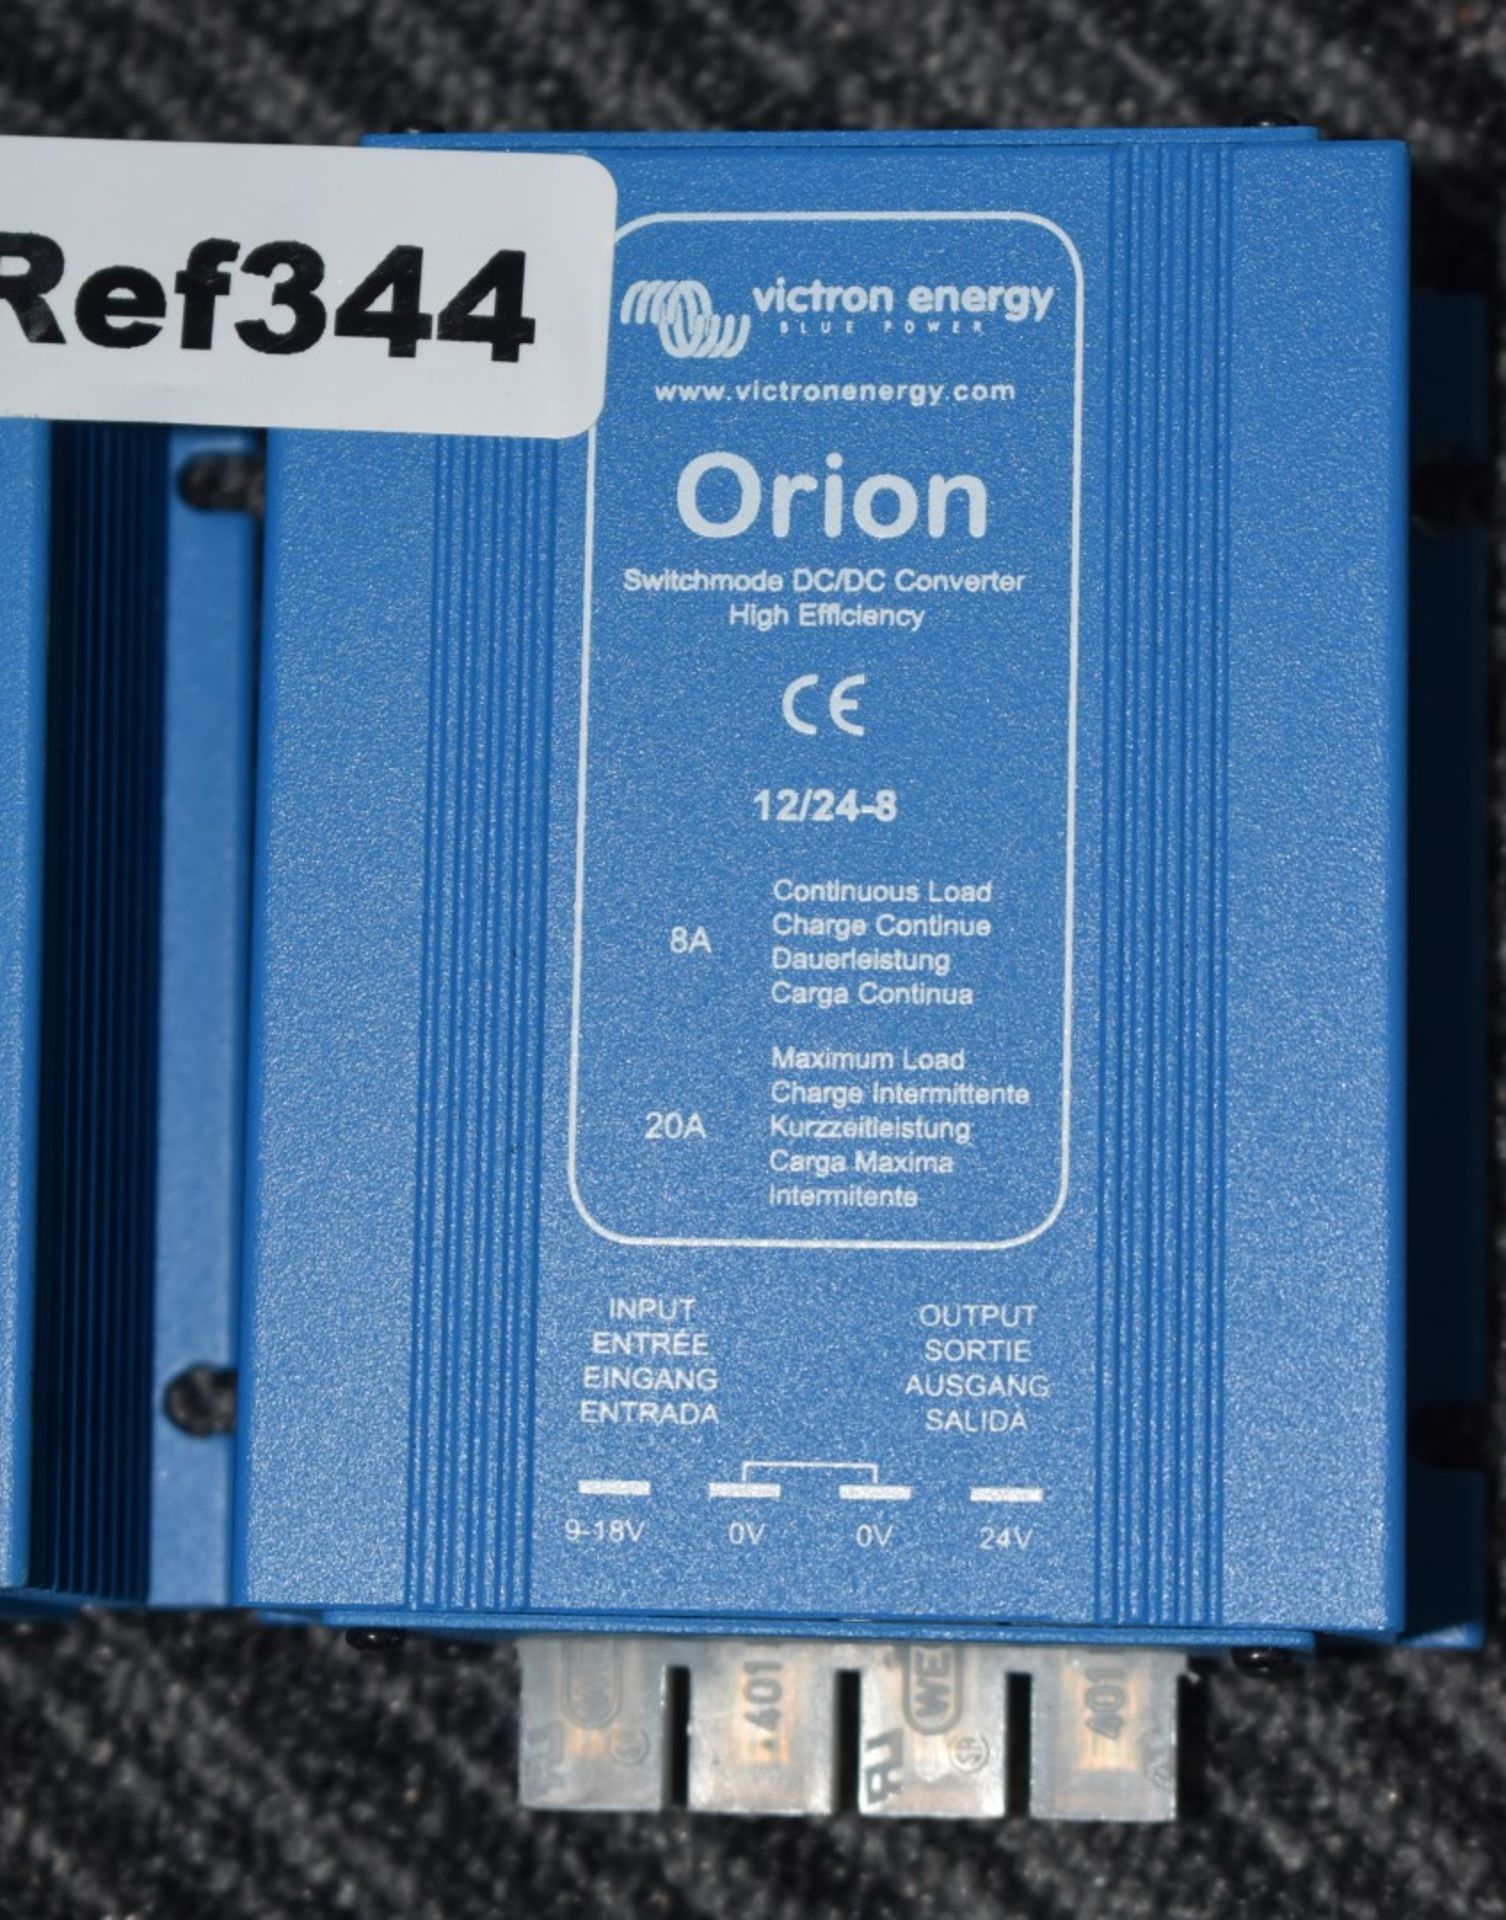 2 x Victron Energy Orion Switchmode DC/DC High Efficiency Condverters 12/24-8 - Model ORI122408020 - - Image 2 of 5